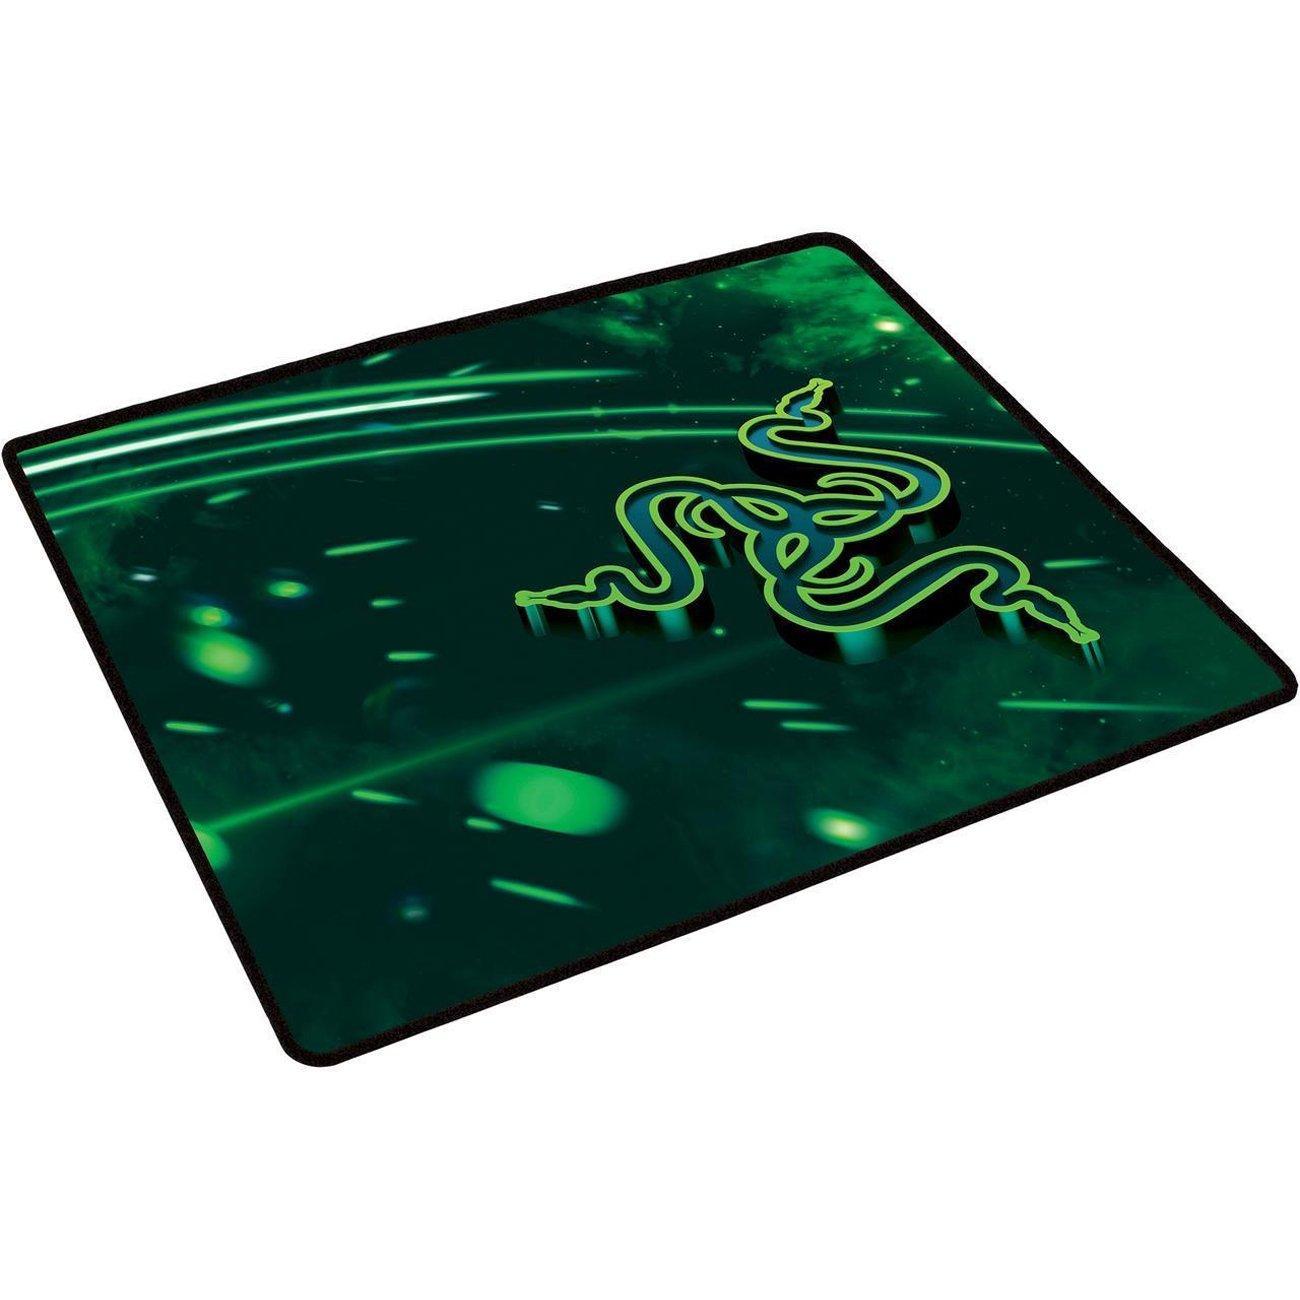 Razer Goliathus Speed Cosmic Edition Soft Gaming Mouse Mat – Small